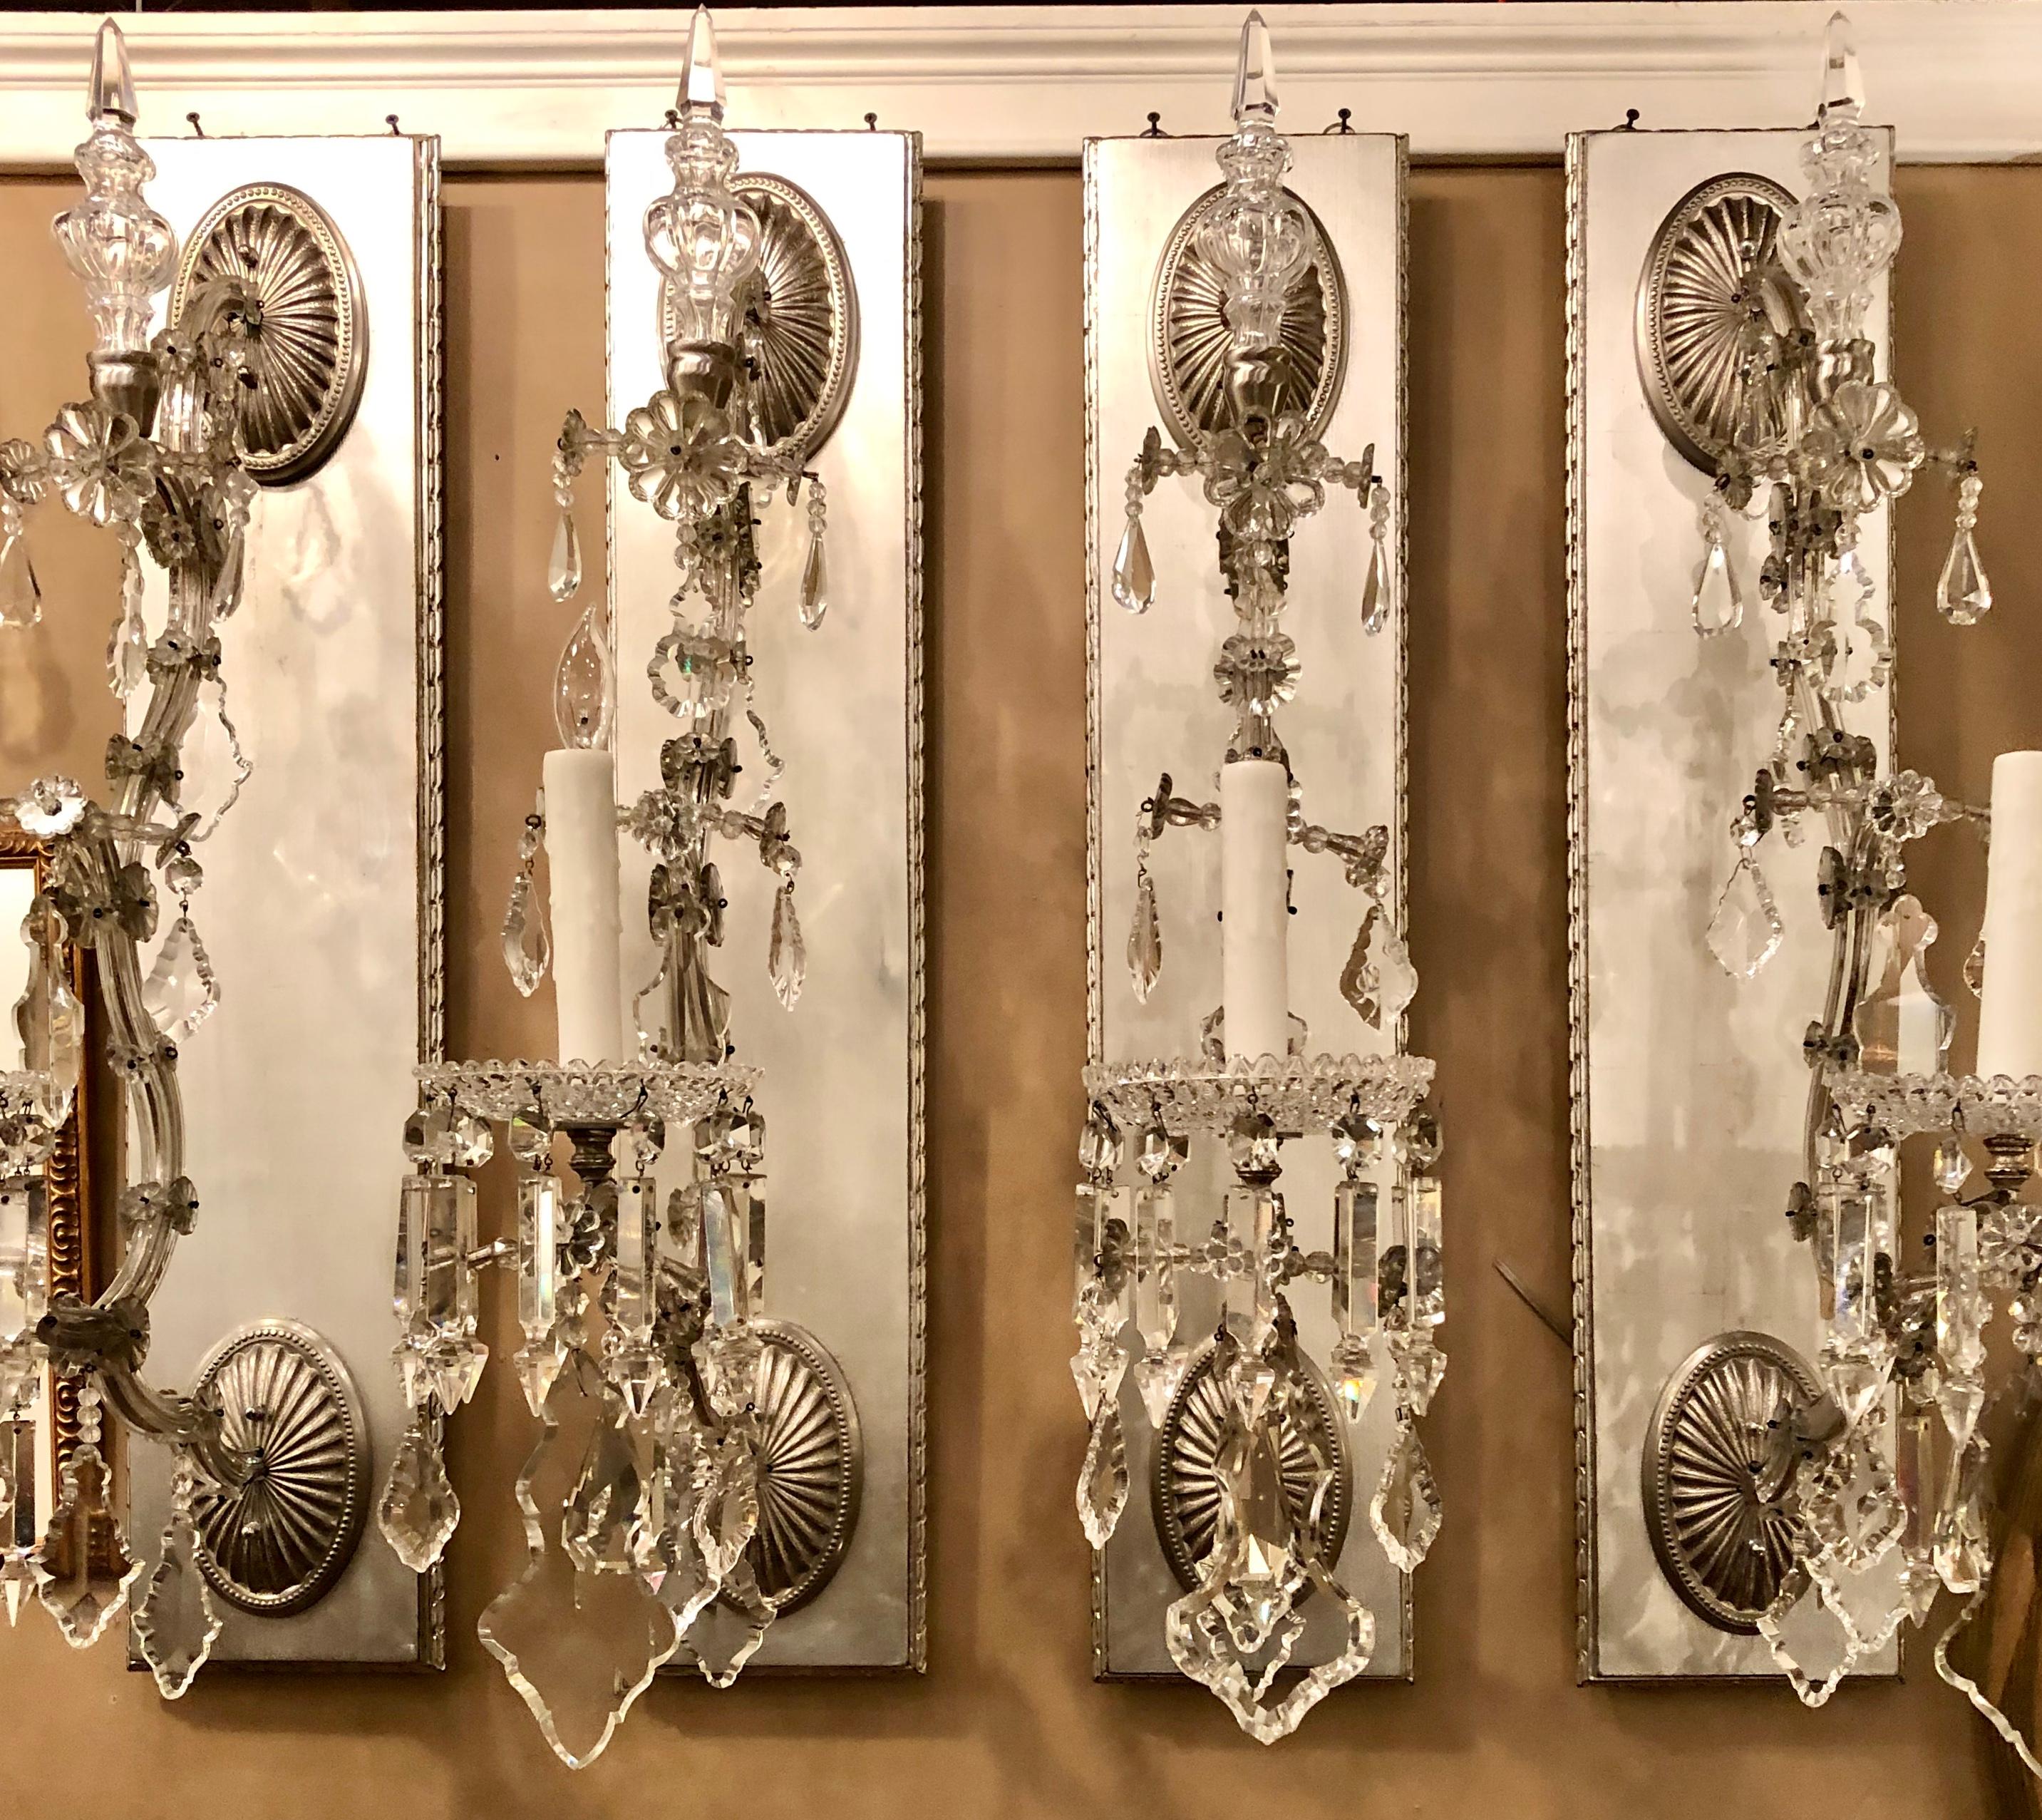 Hollywood Regency Silver gilt wall scones with crystal set of four. A finely gilt set of four palatial silver one light wall sconce with crystal prisms and bobeche. A stunning set of four. Can purchase two if only one pair are needed.